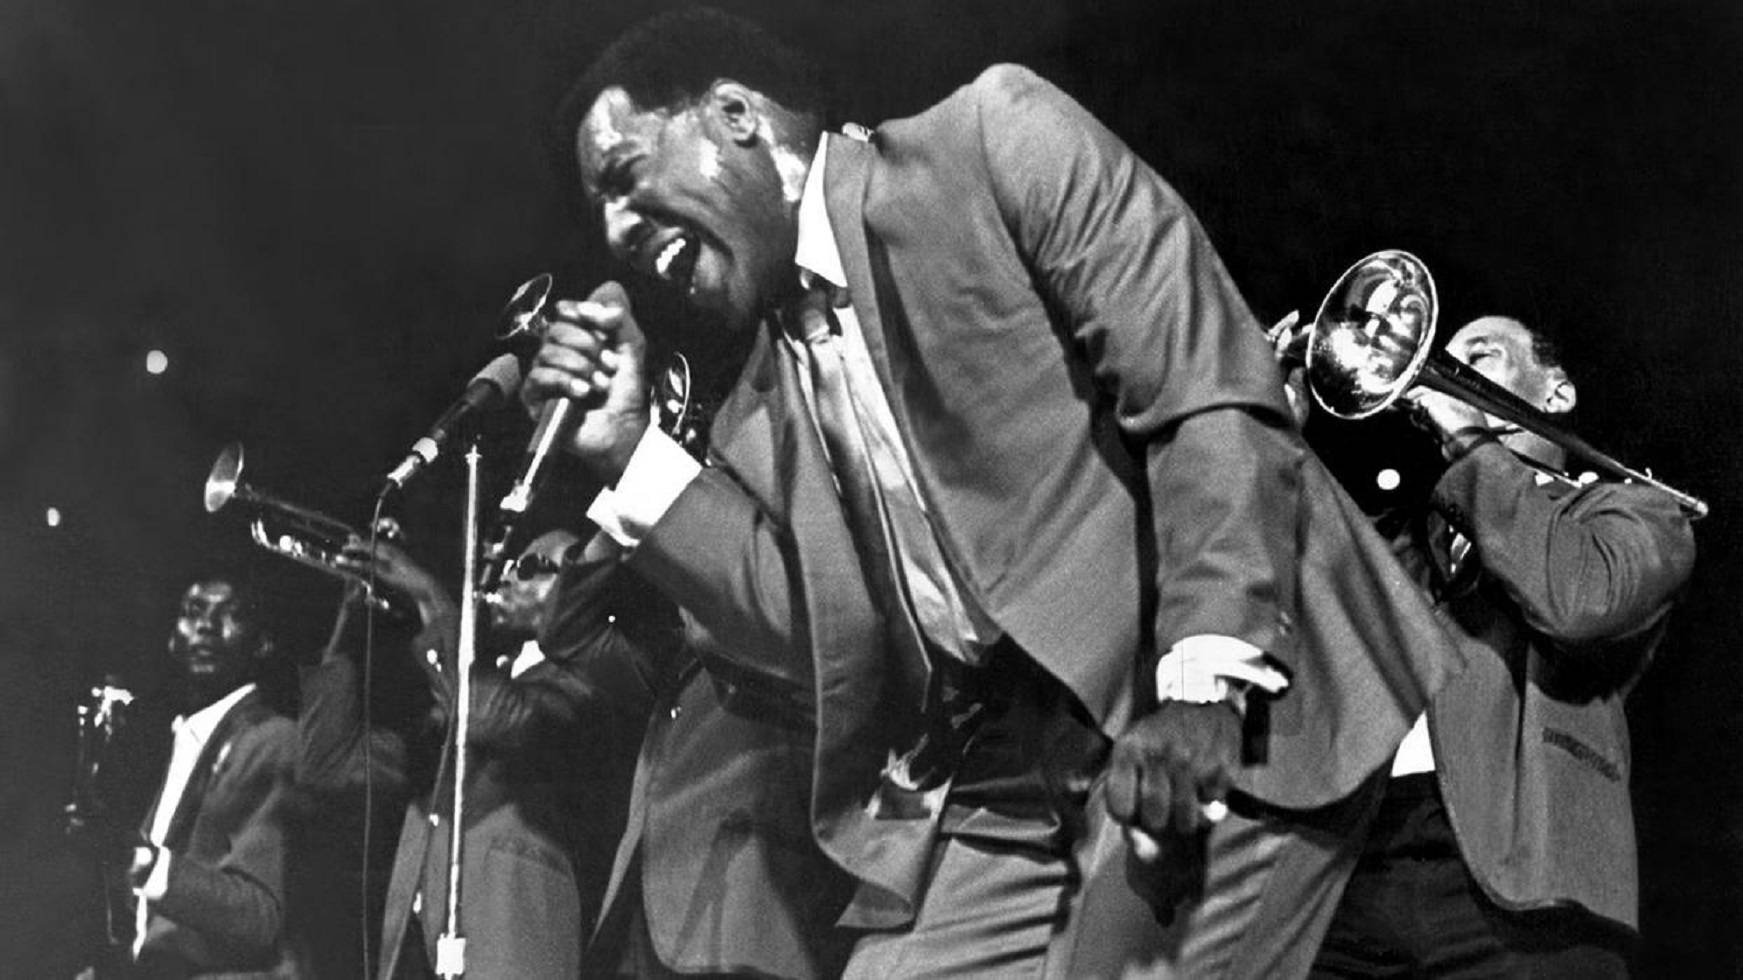 Otisredding Sjunger Med Ett Brassband. (when Discussing A Wallpaper Featuring An Image Of Otis Redding Performing With A Brass Band) Wallpaper